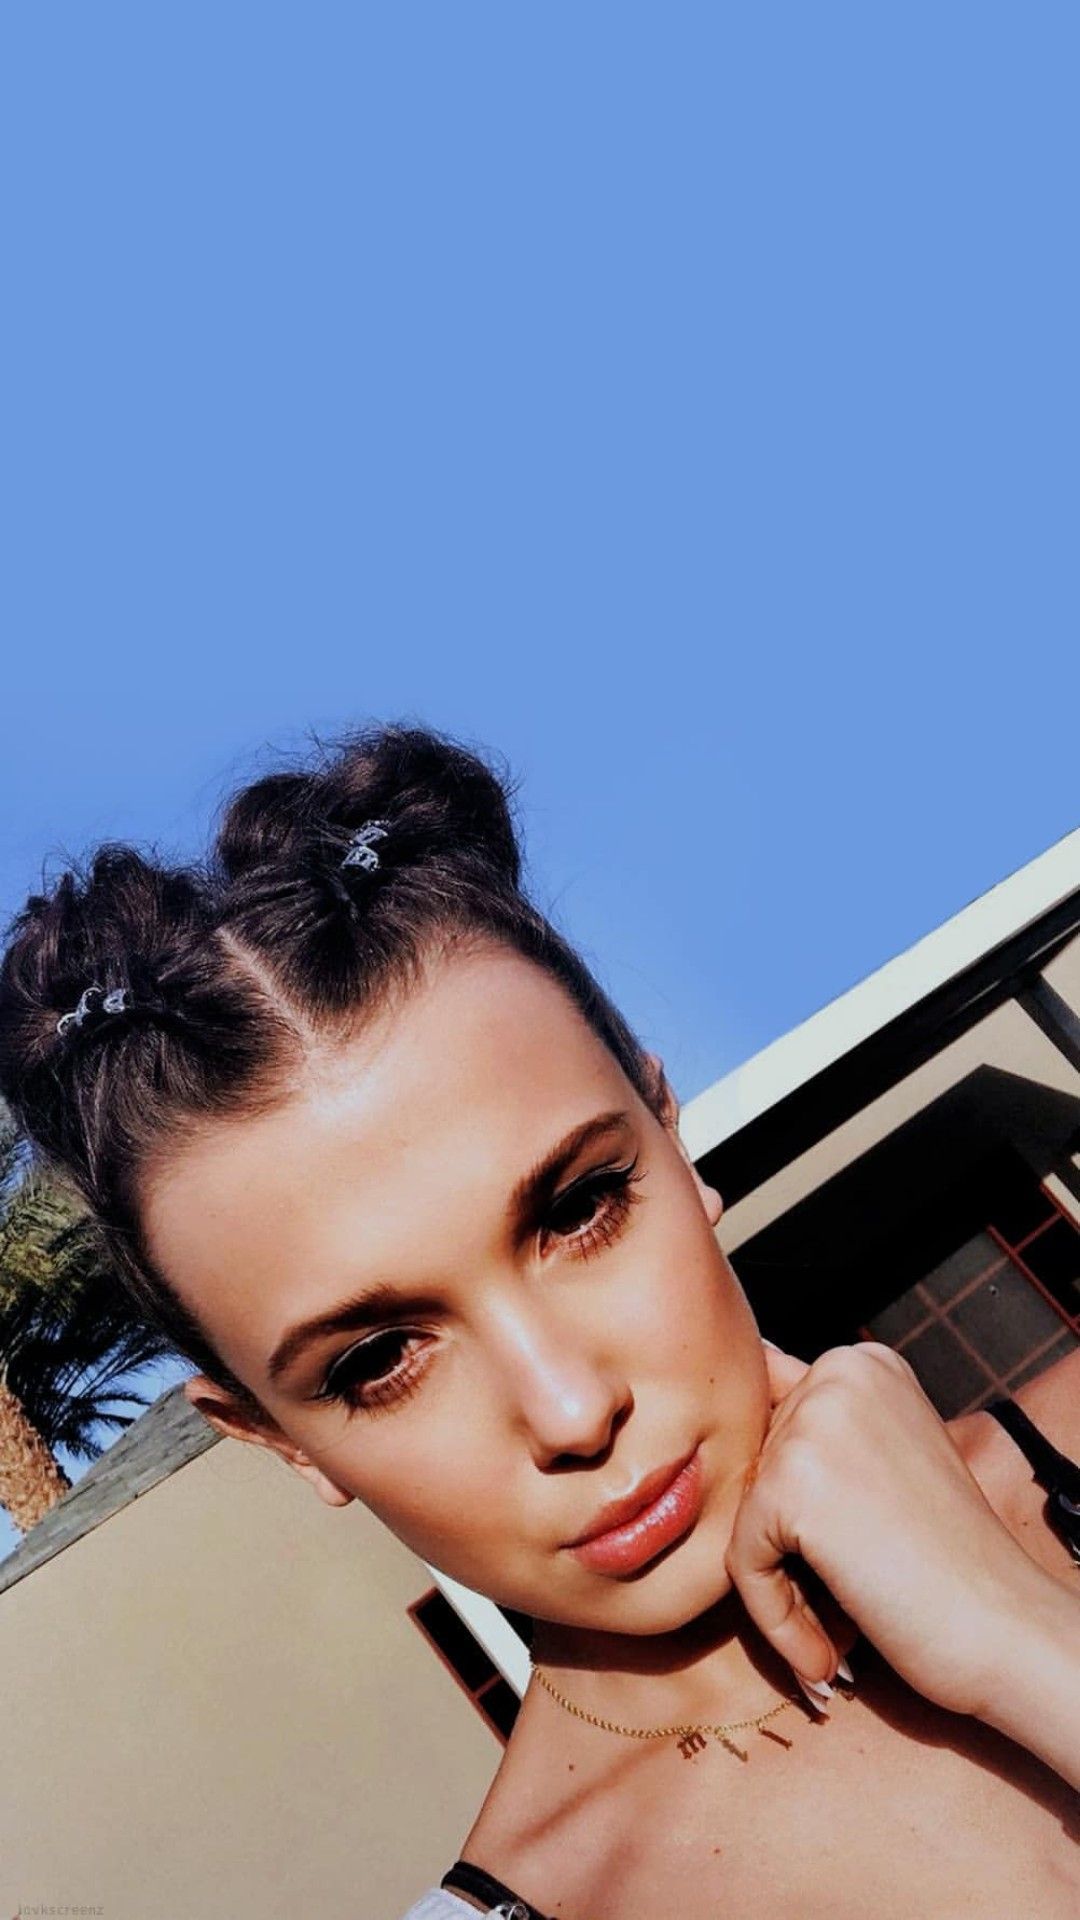 Millie Bobby Brown Photoshoot Wallpapers